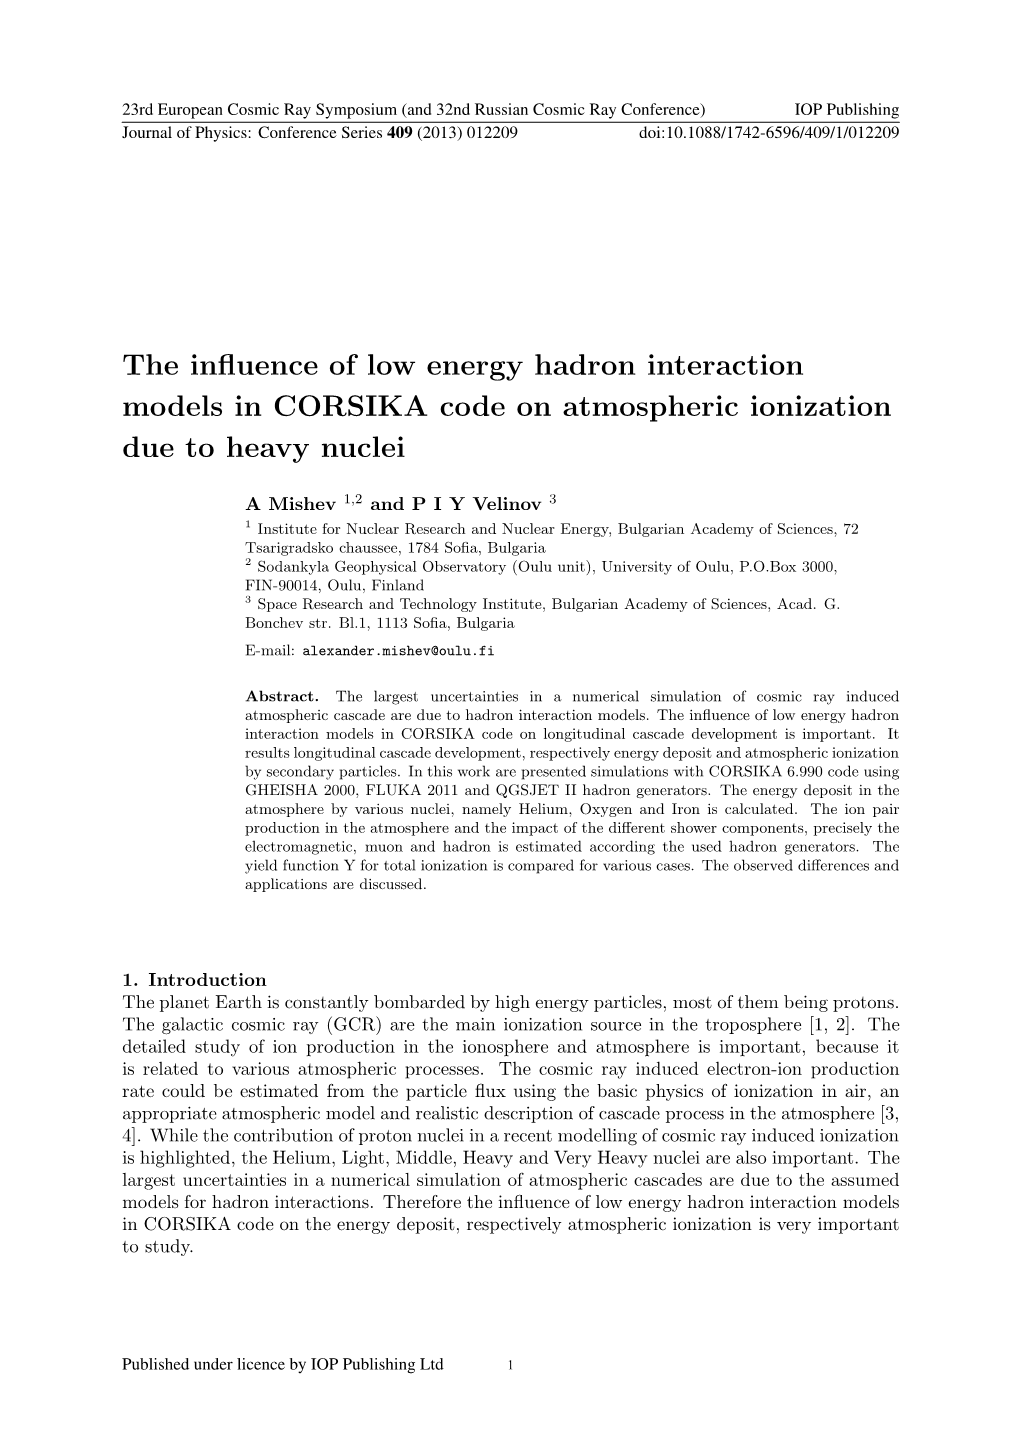 The Influence of Low Energy Hadron Interaction Models in CORSIKA